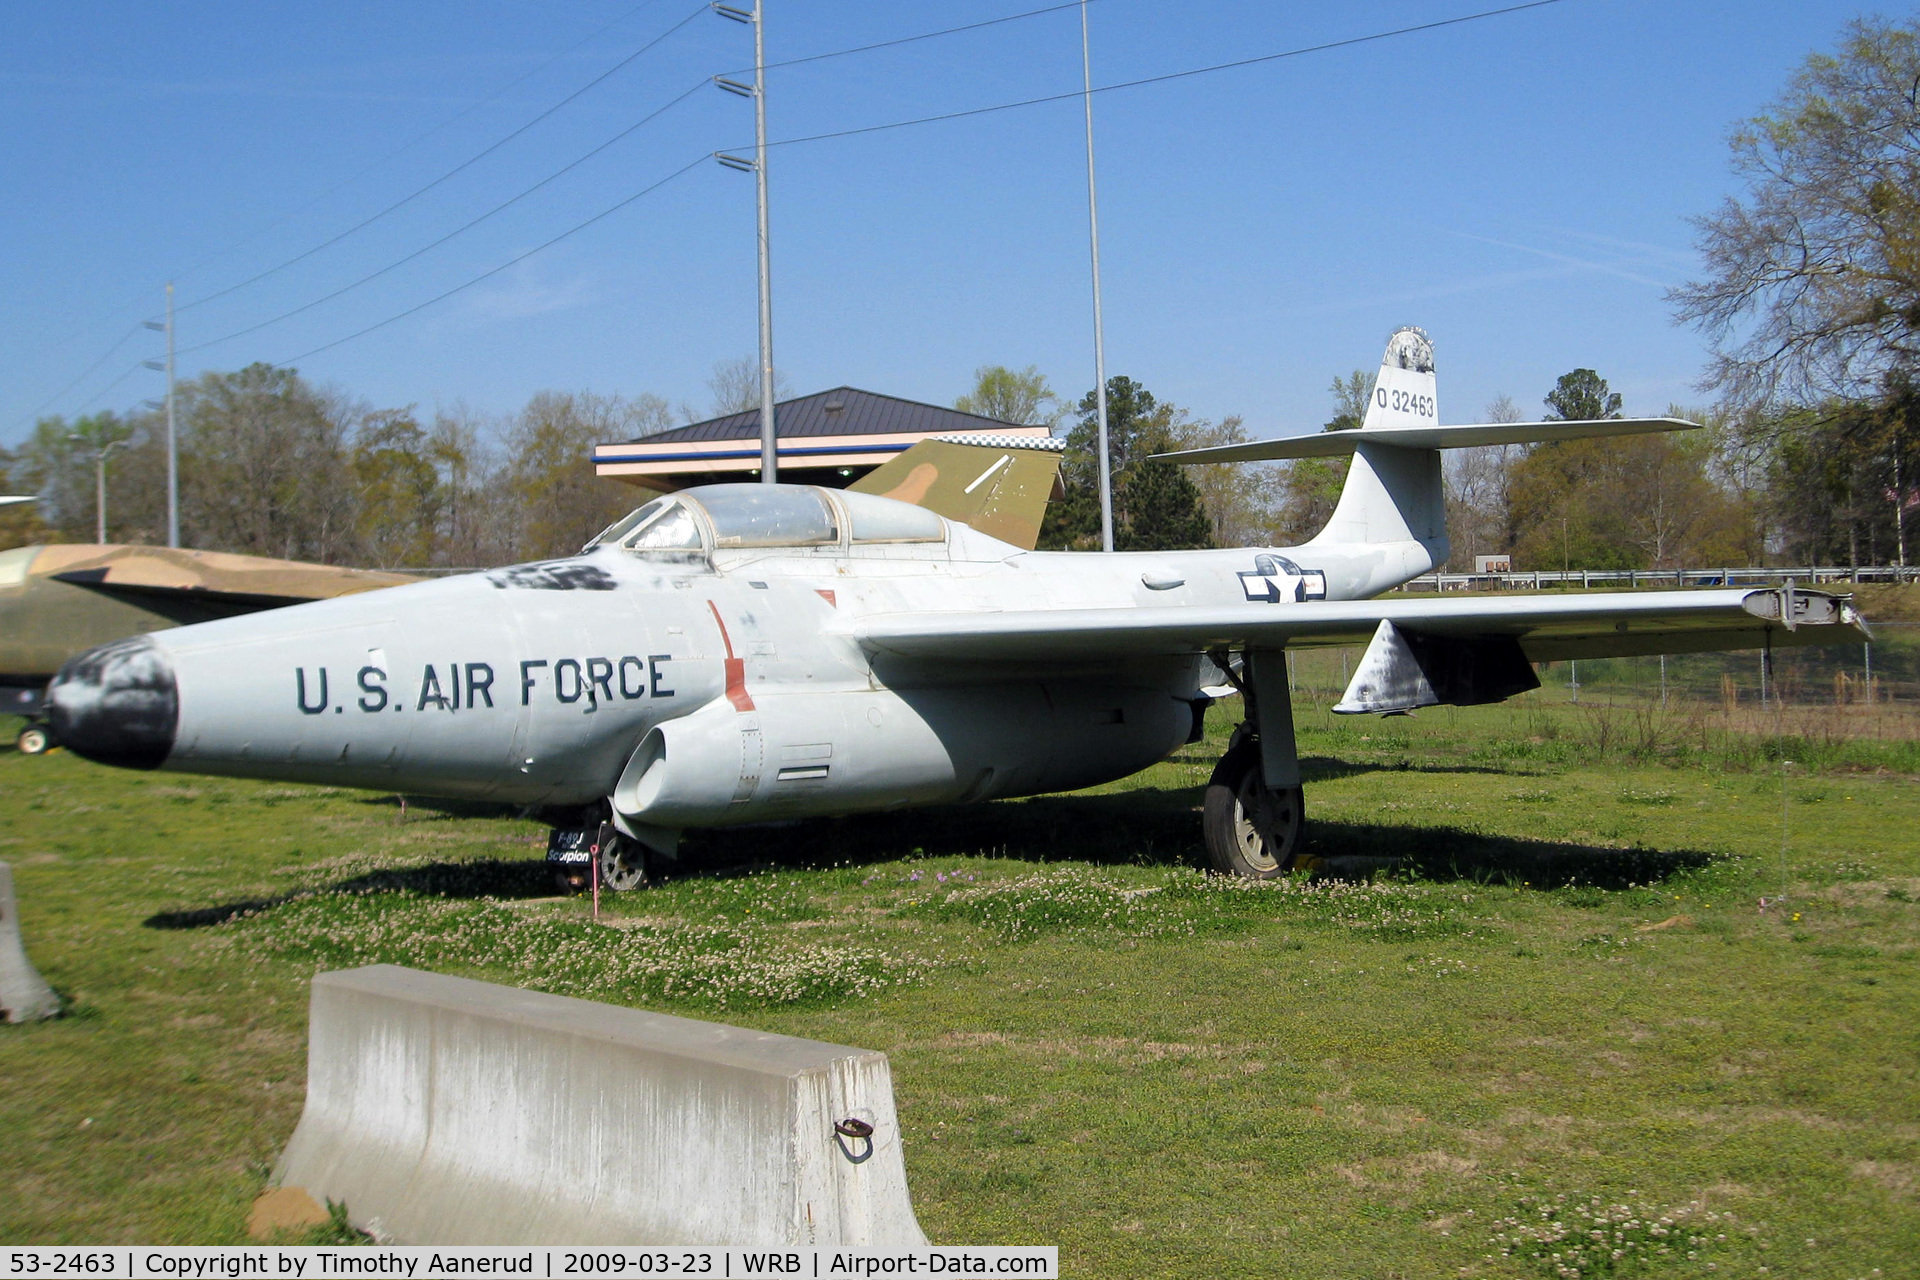 53-2463, 1953 Northrop F-89D Scorpion C/N Not found 53-2463, Museum of Aviation, Robins AFB